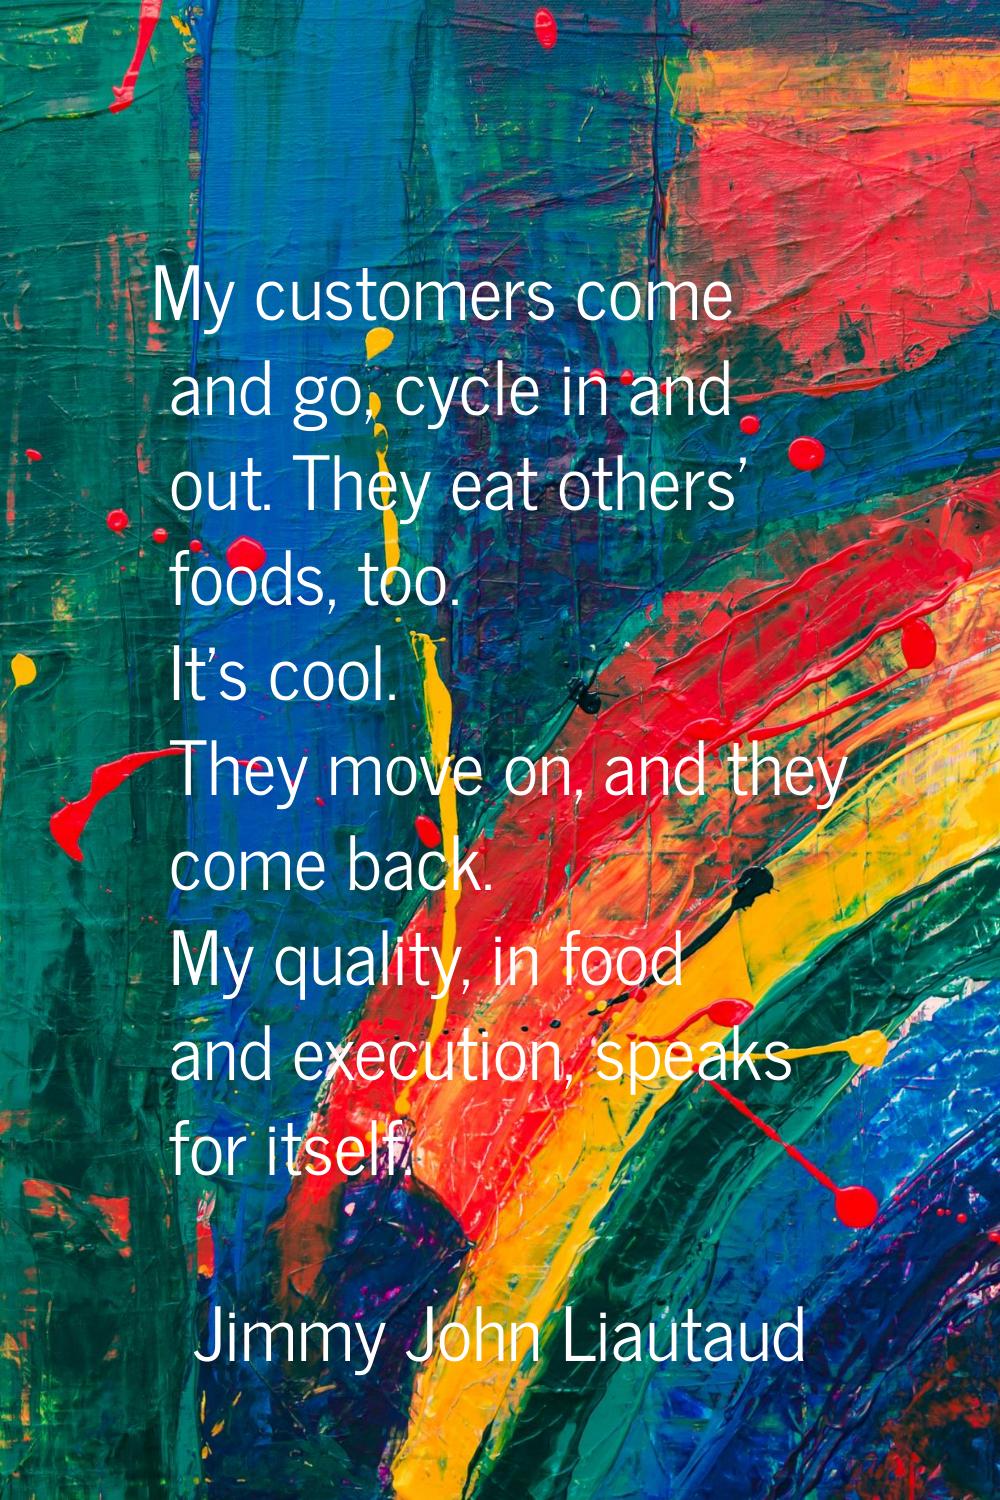 My customers come and go, cycle in and out. They eat others' foods, too. It's cool. They move on, a